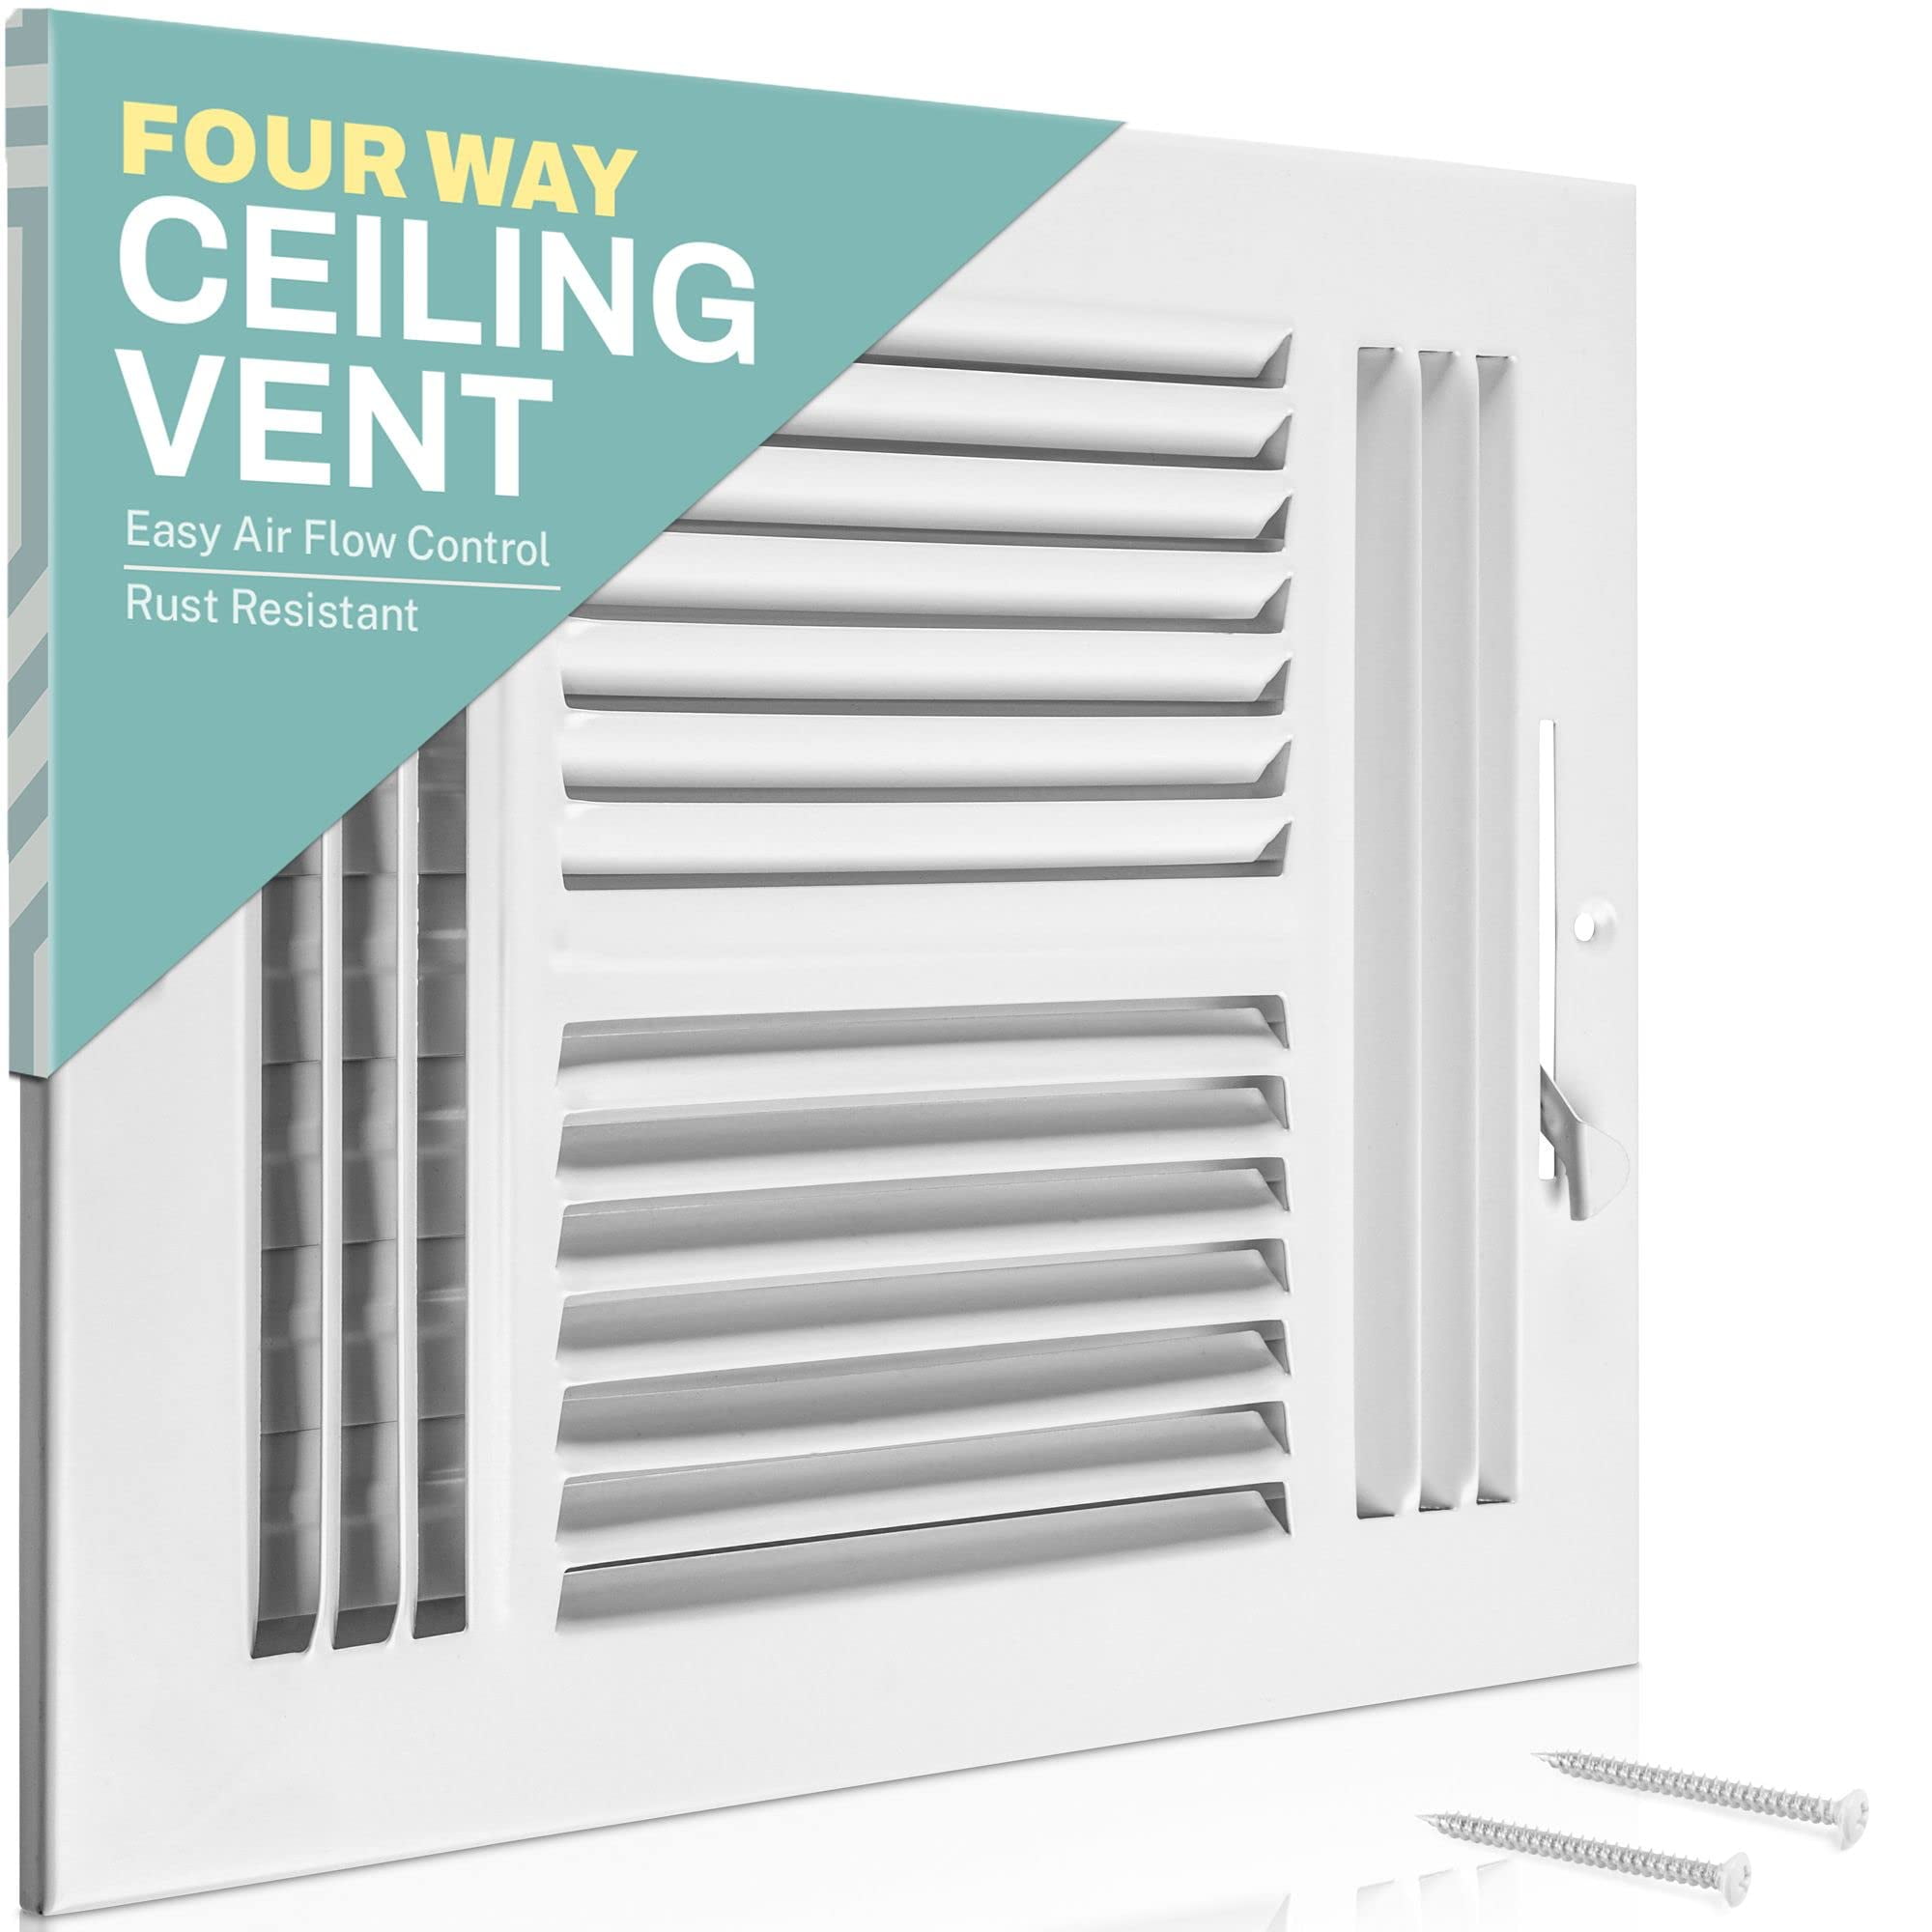 Buy Home Intuition Ceiling Register Air Vent Covers for Home Ceiling or Wall 8X8 Inch Duct